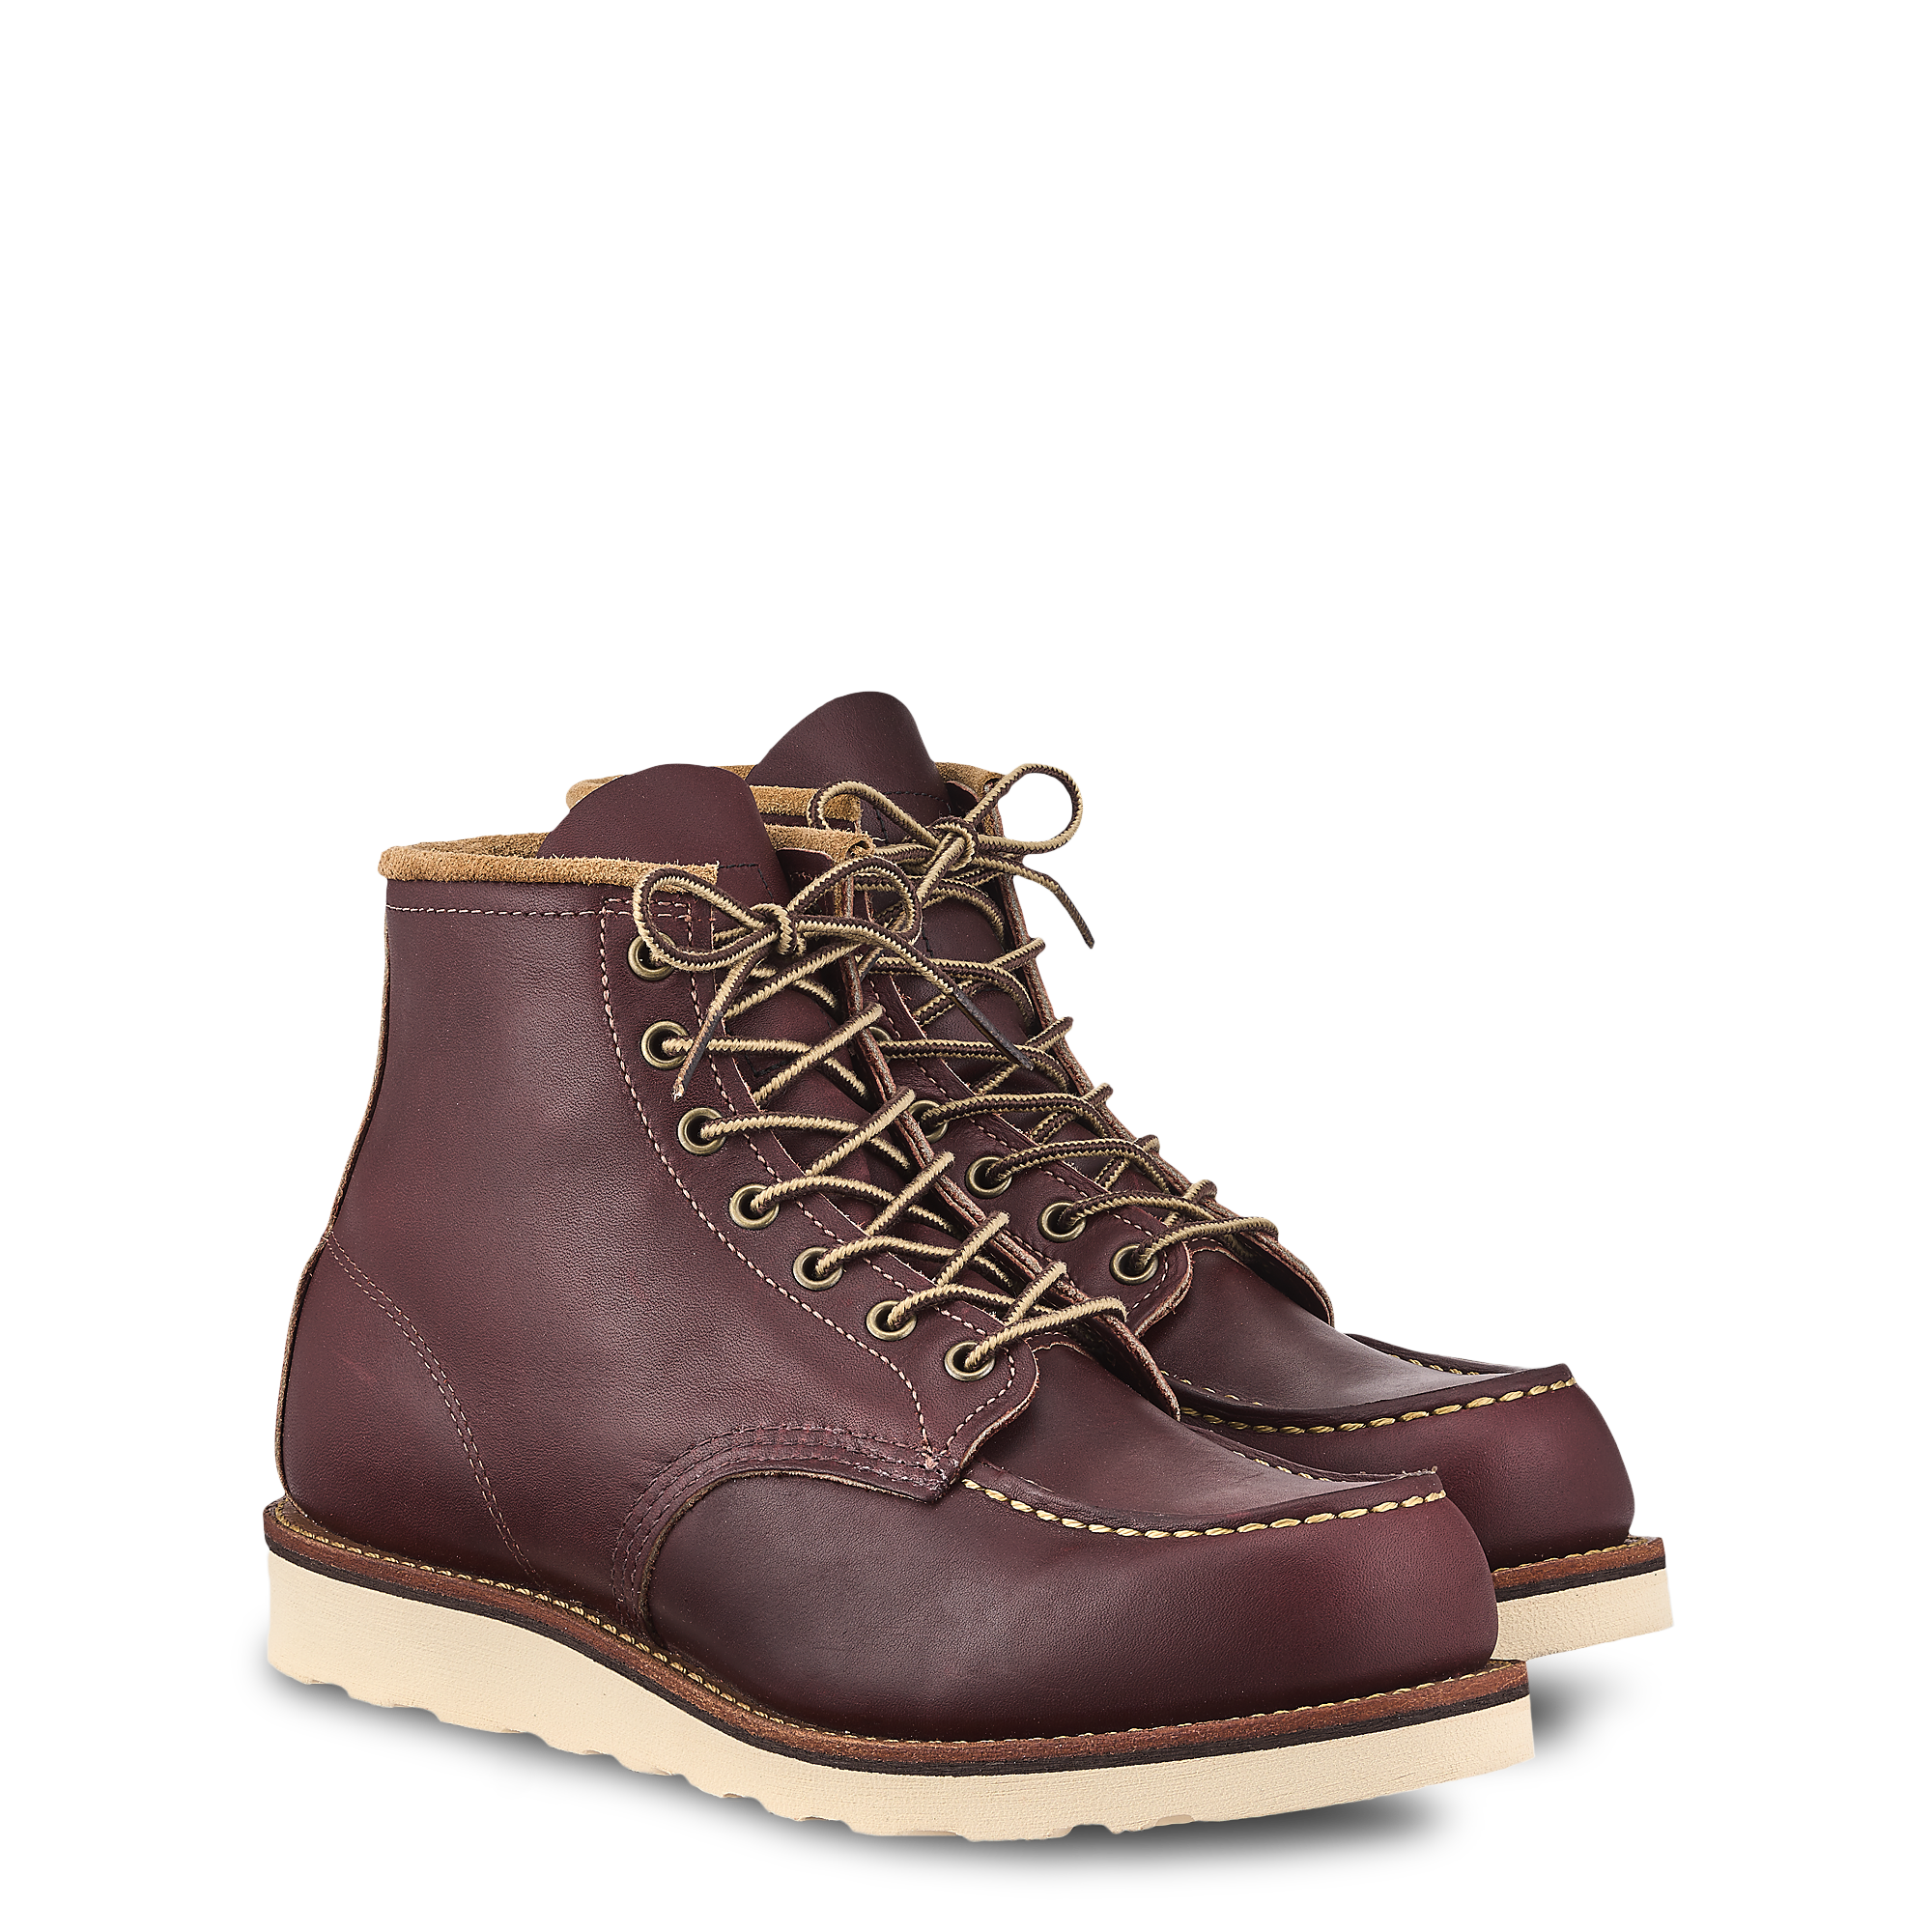 oxblood red wings